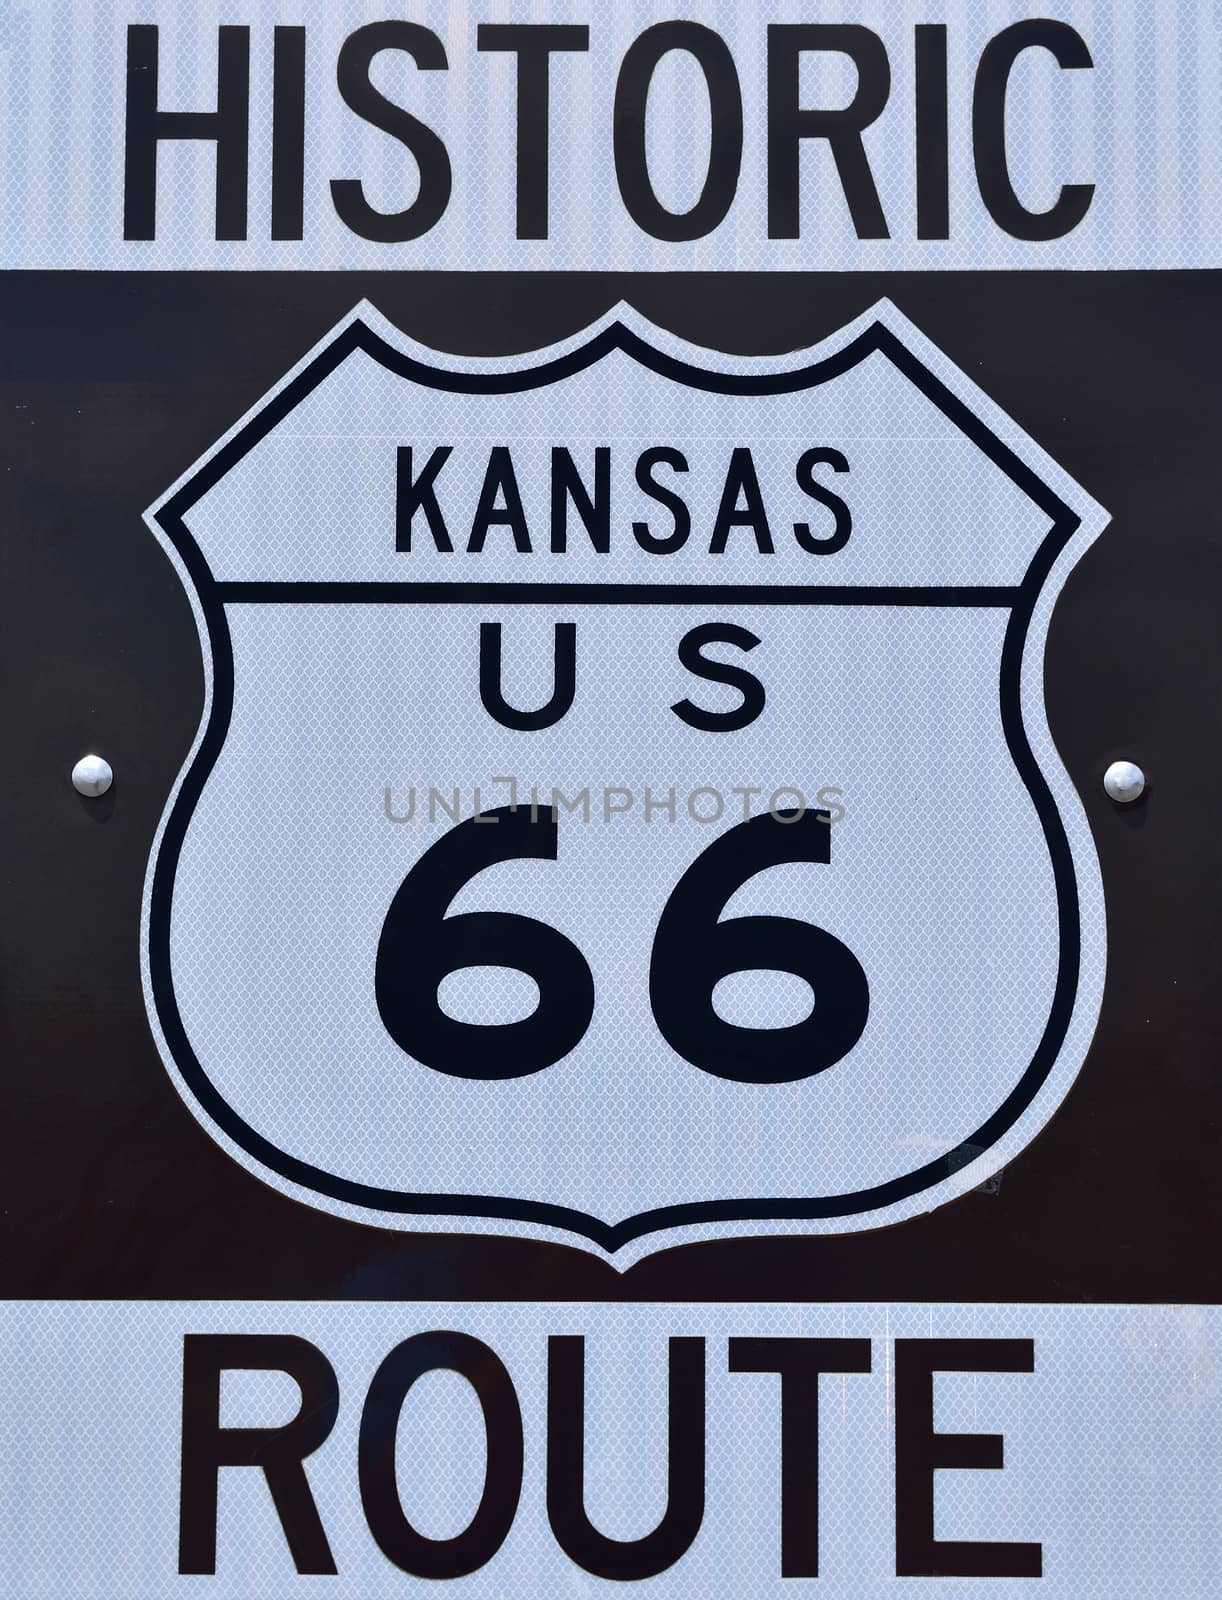 Historic Route 66 sign in Kansas.